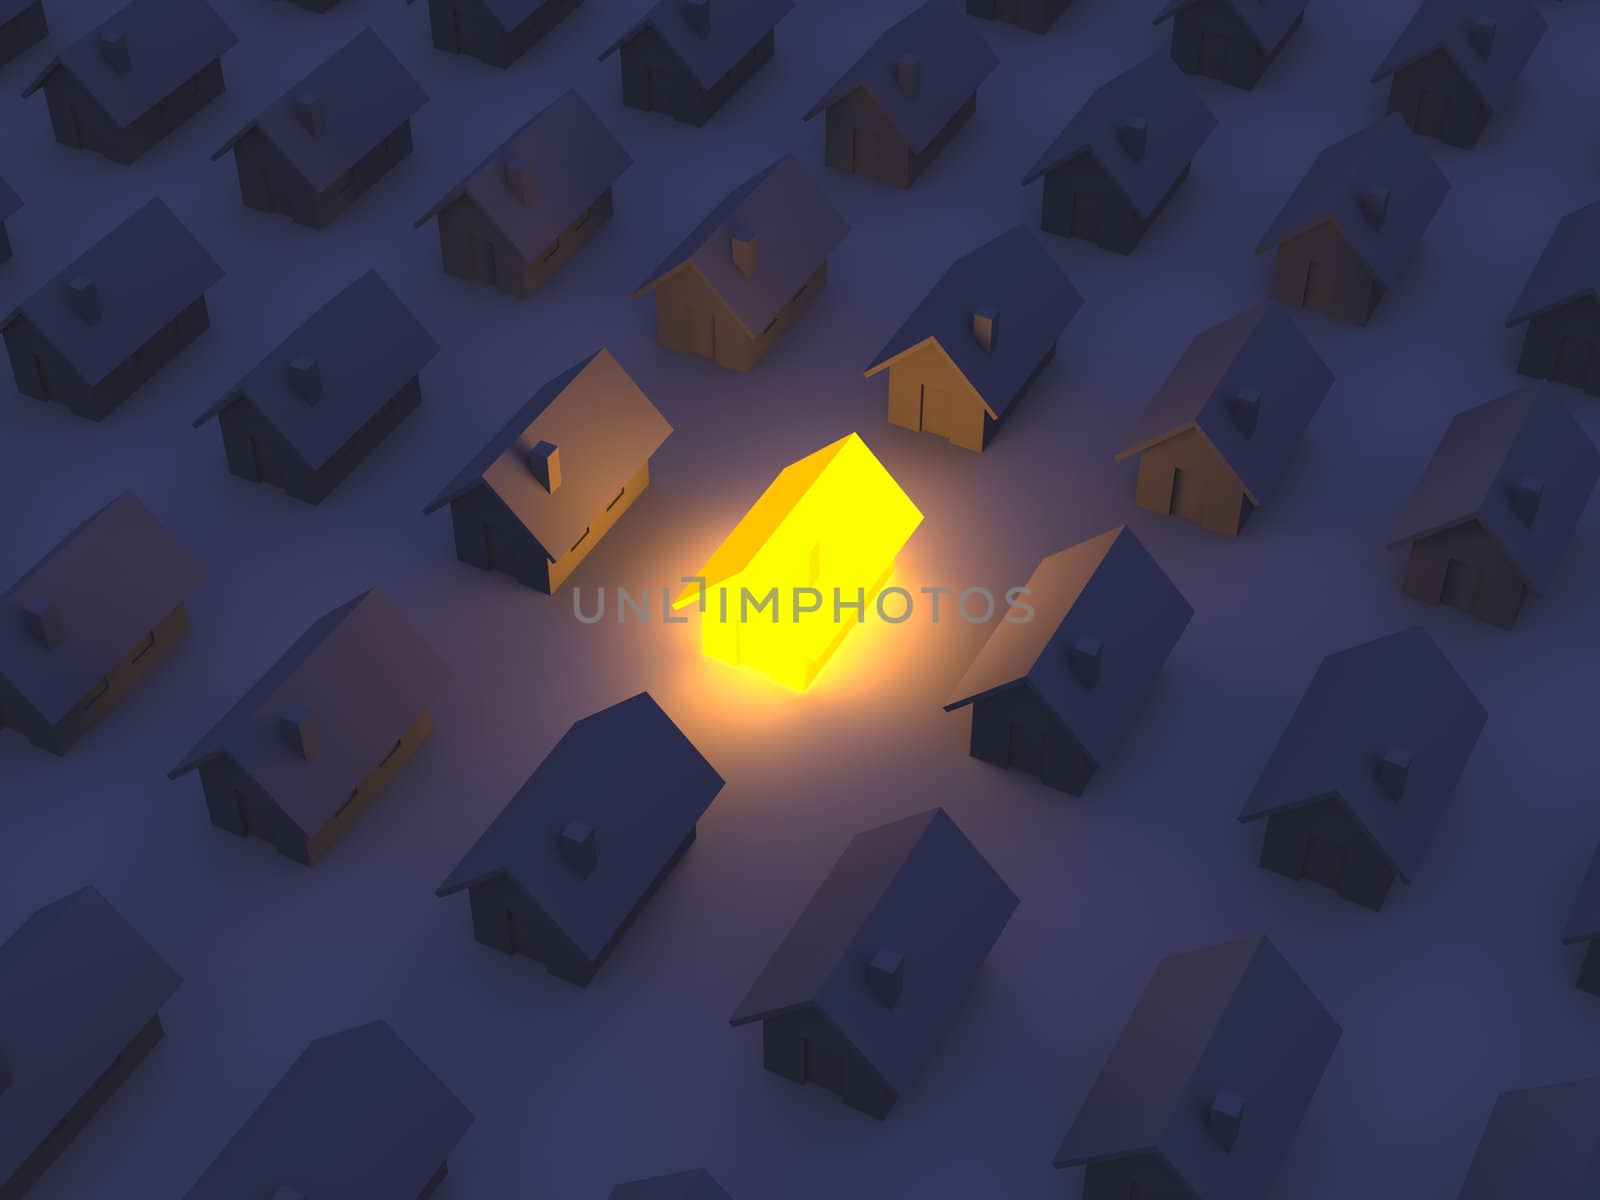 Illuminated Toy House by Spectral